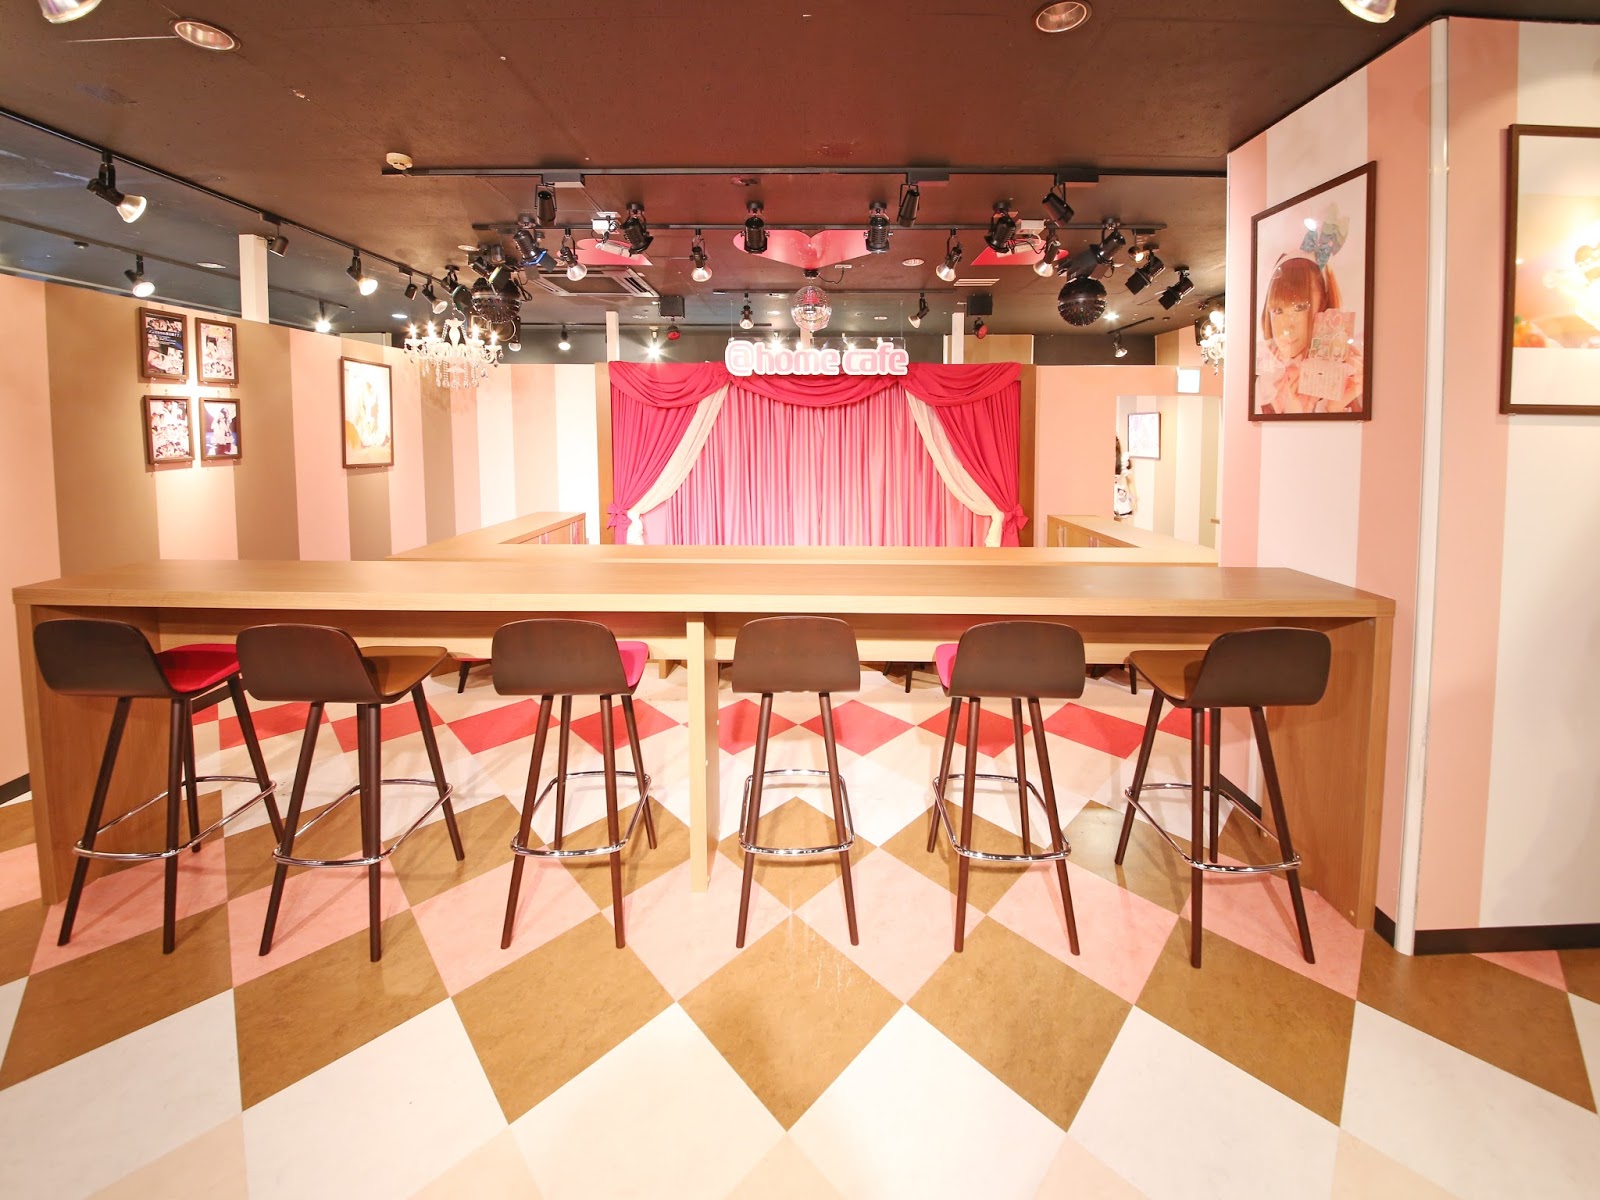 at-home cafe ドンキ店（あっとほぉーむカフェ）の風景